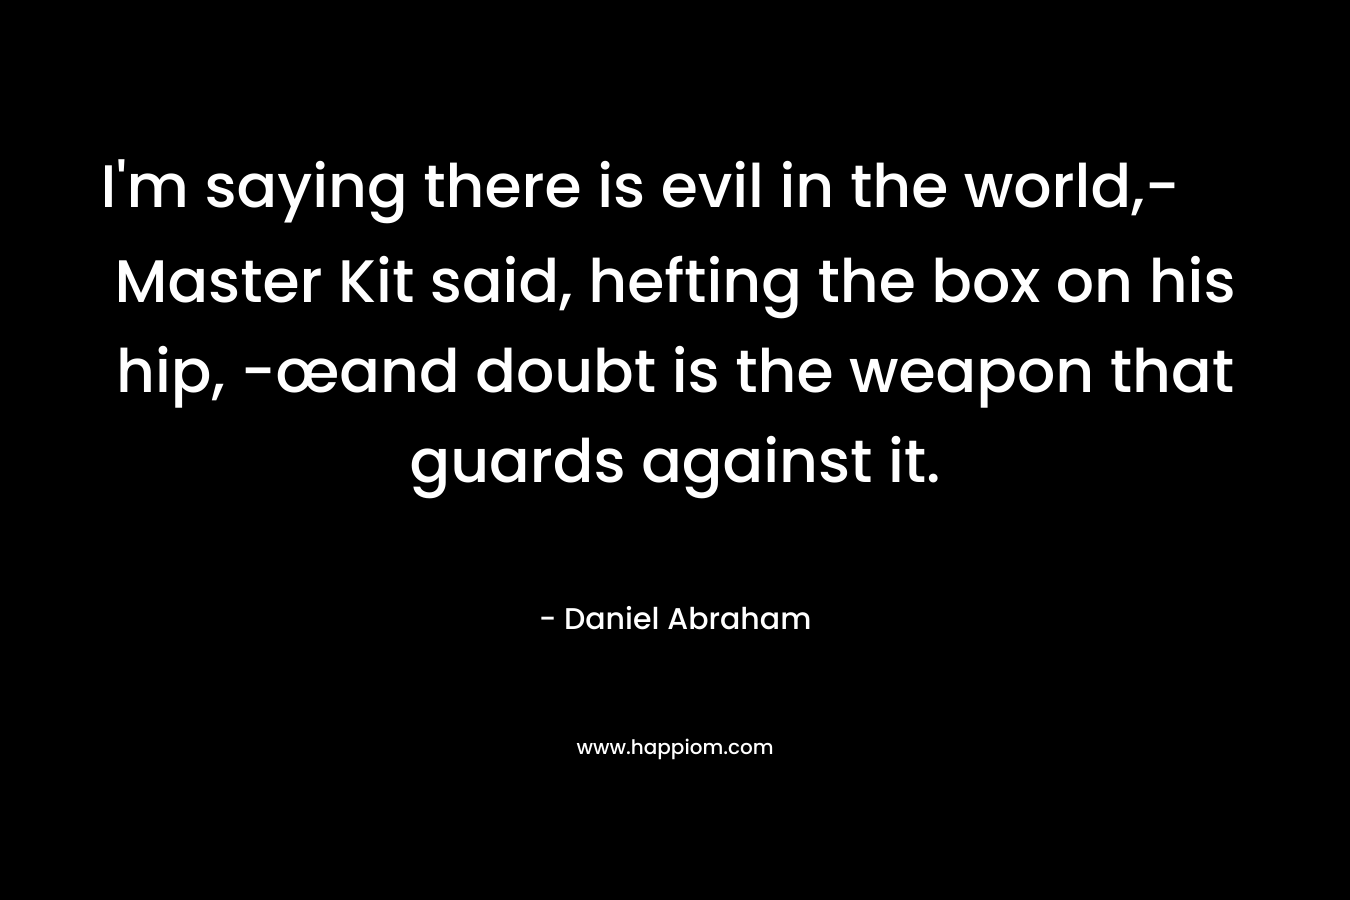 I’m saying there is evil in the world,- Master Kit said, hefting the box on his hip, -œand doubt is the weapon that guards against it. – Daniel Abraham